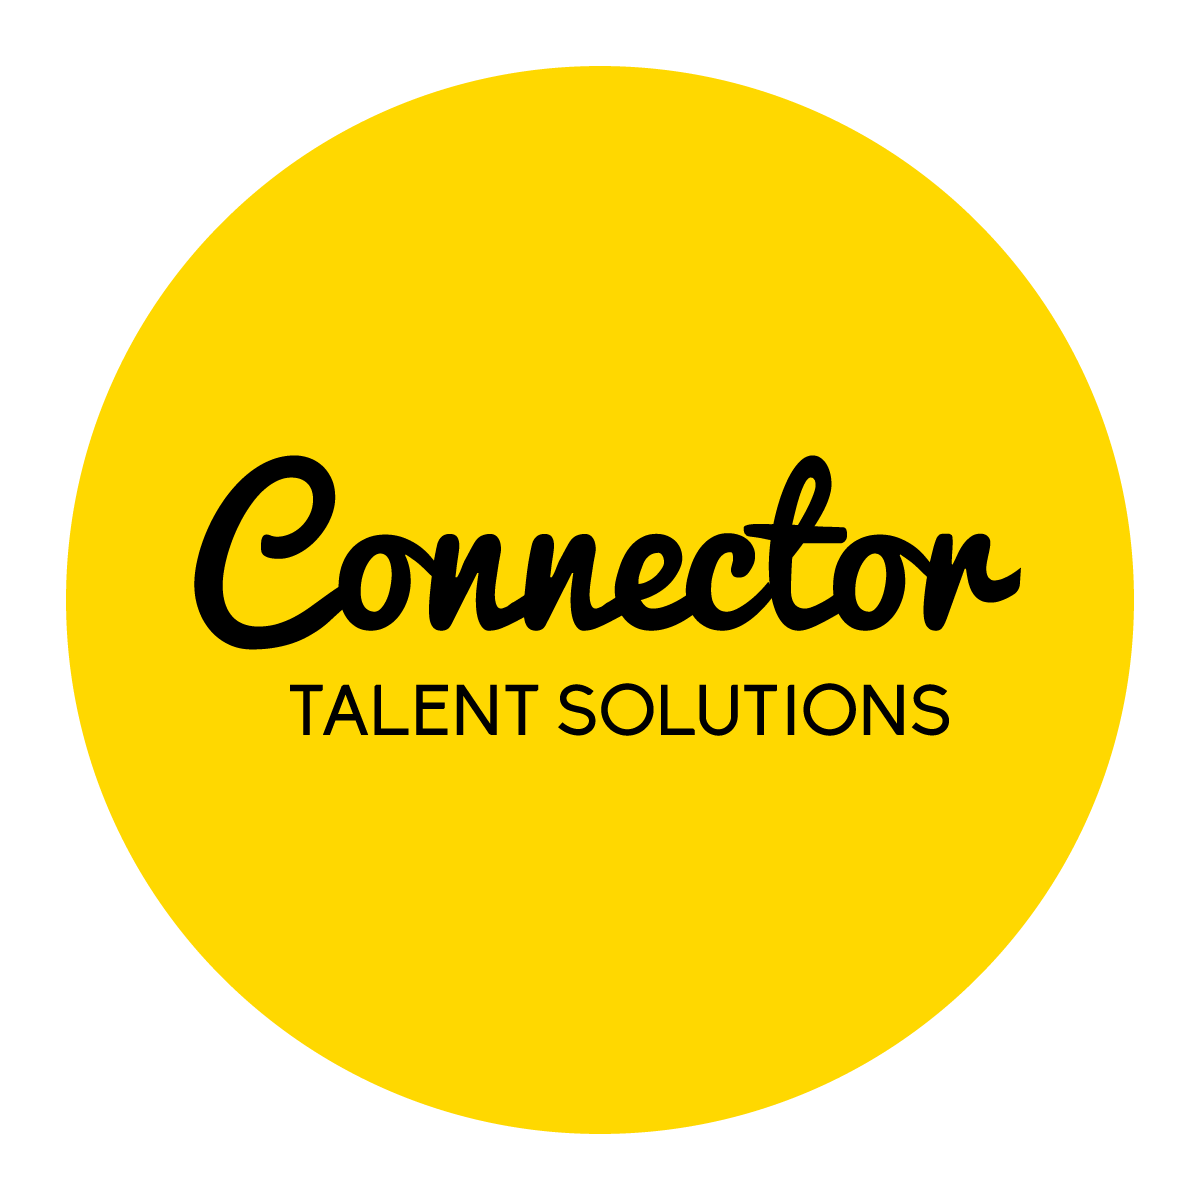 Connector Talent Solutions